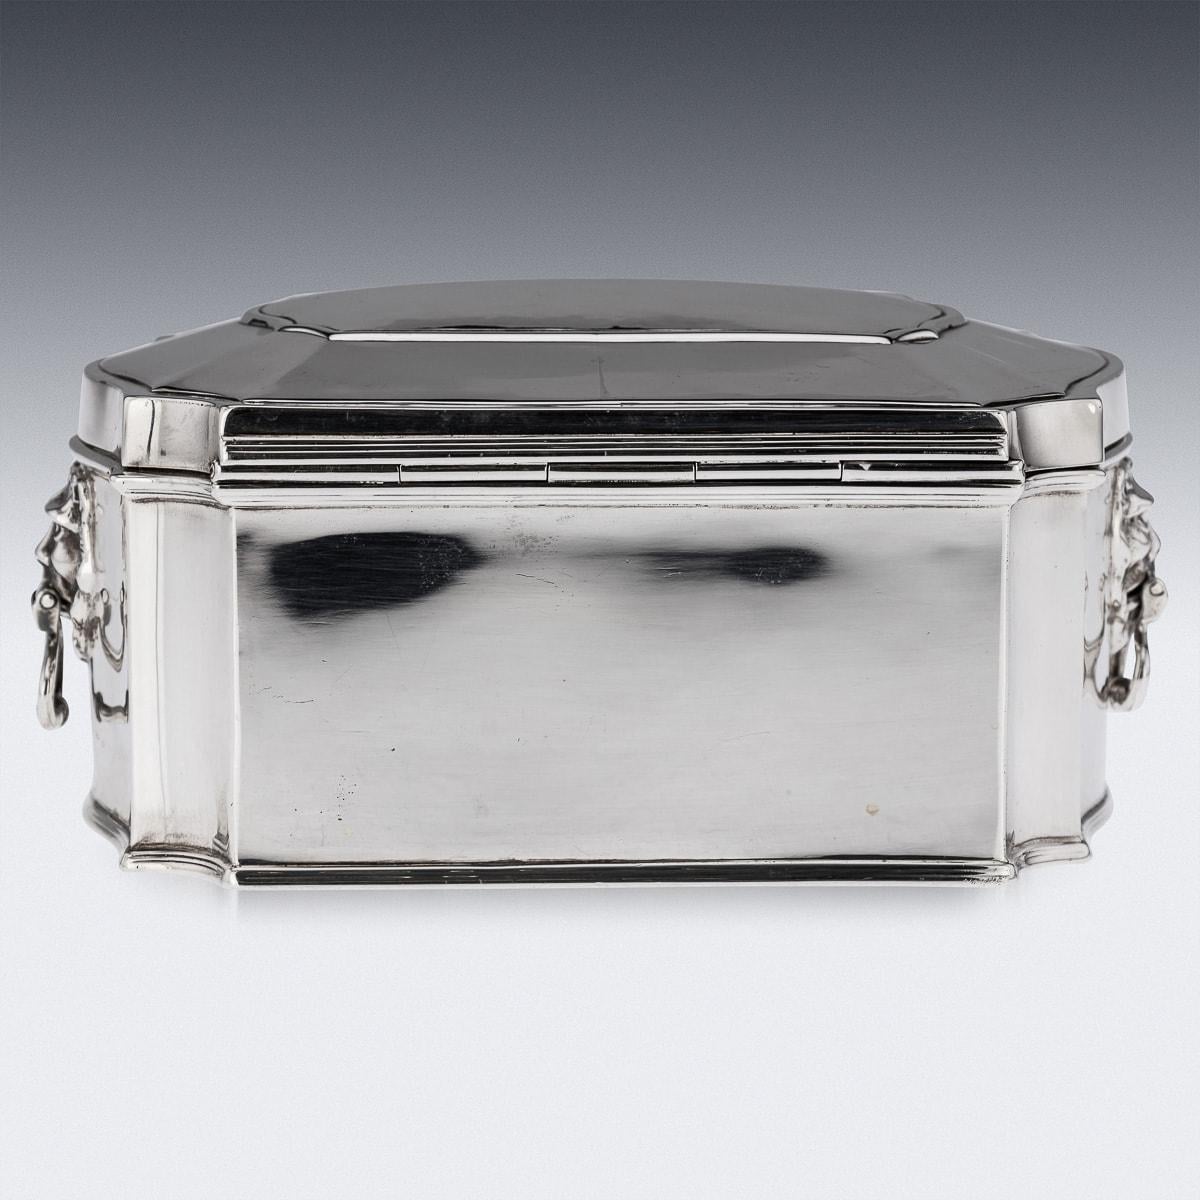 20th Century English Solid Silver Casket, Sheffield, c.1915 In Good Condition For Sale In Royal Tunbridge Wells, Kent